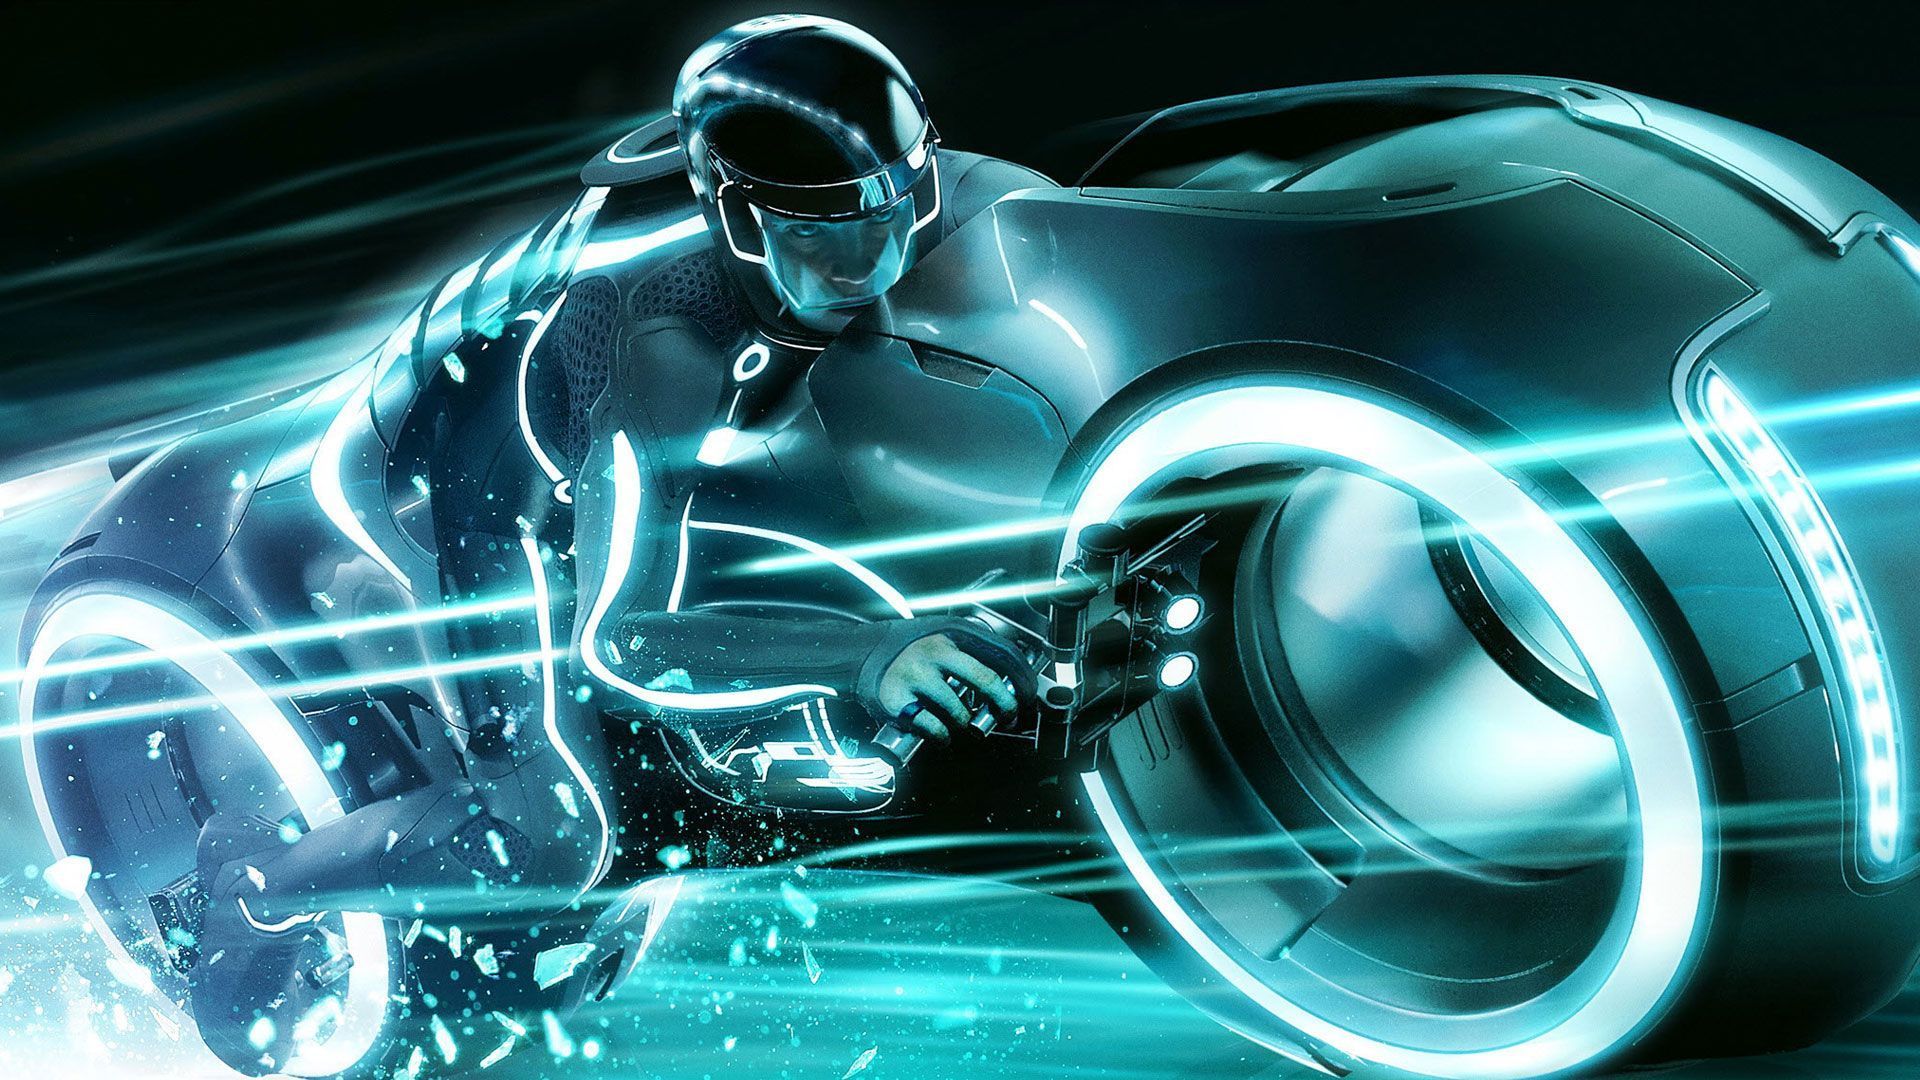 Tron Legacy HD 1080p Wallpapers | HD Wallpapers